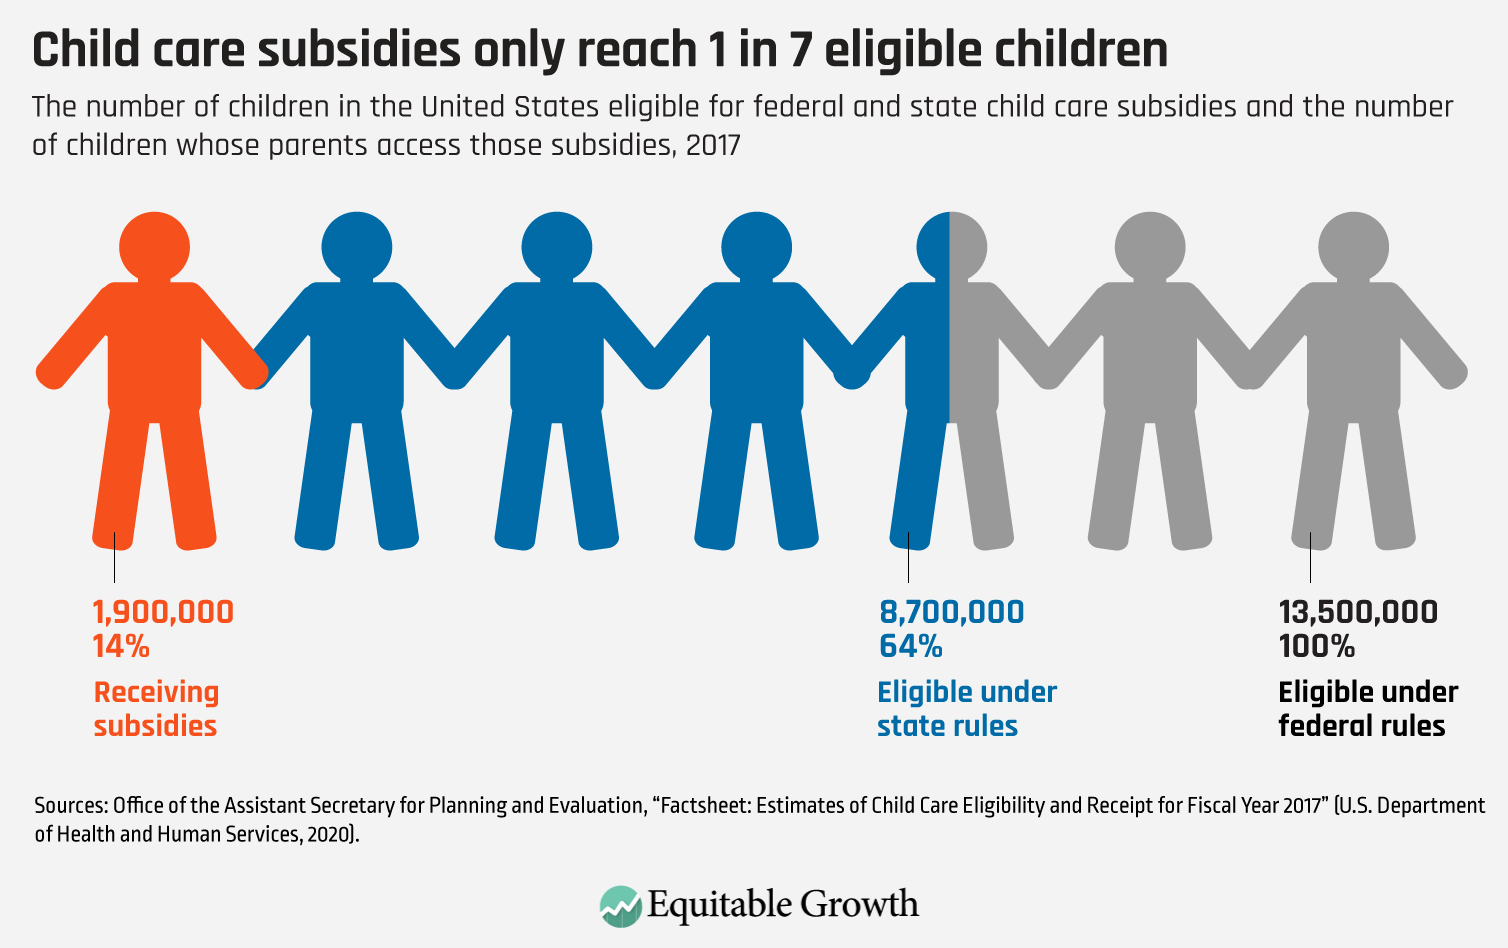 The number of children in the United States eligible for federal and state child care subsidies and the number of children whose parents access those subsidies, 2017